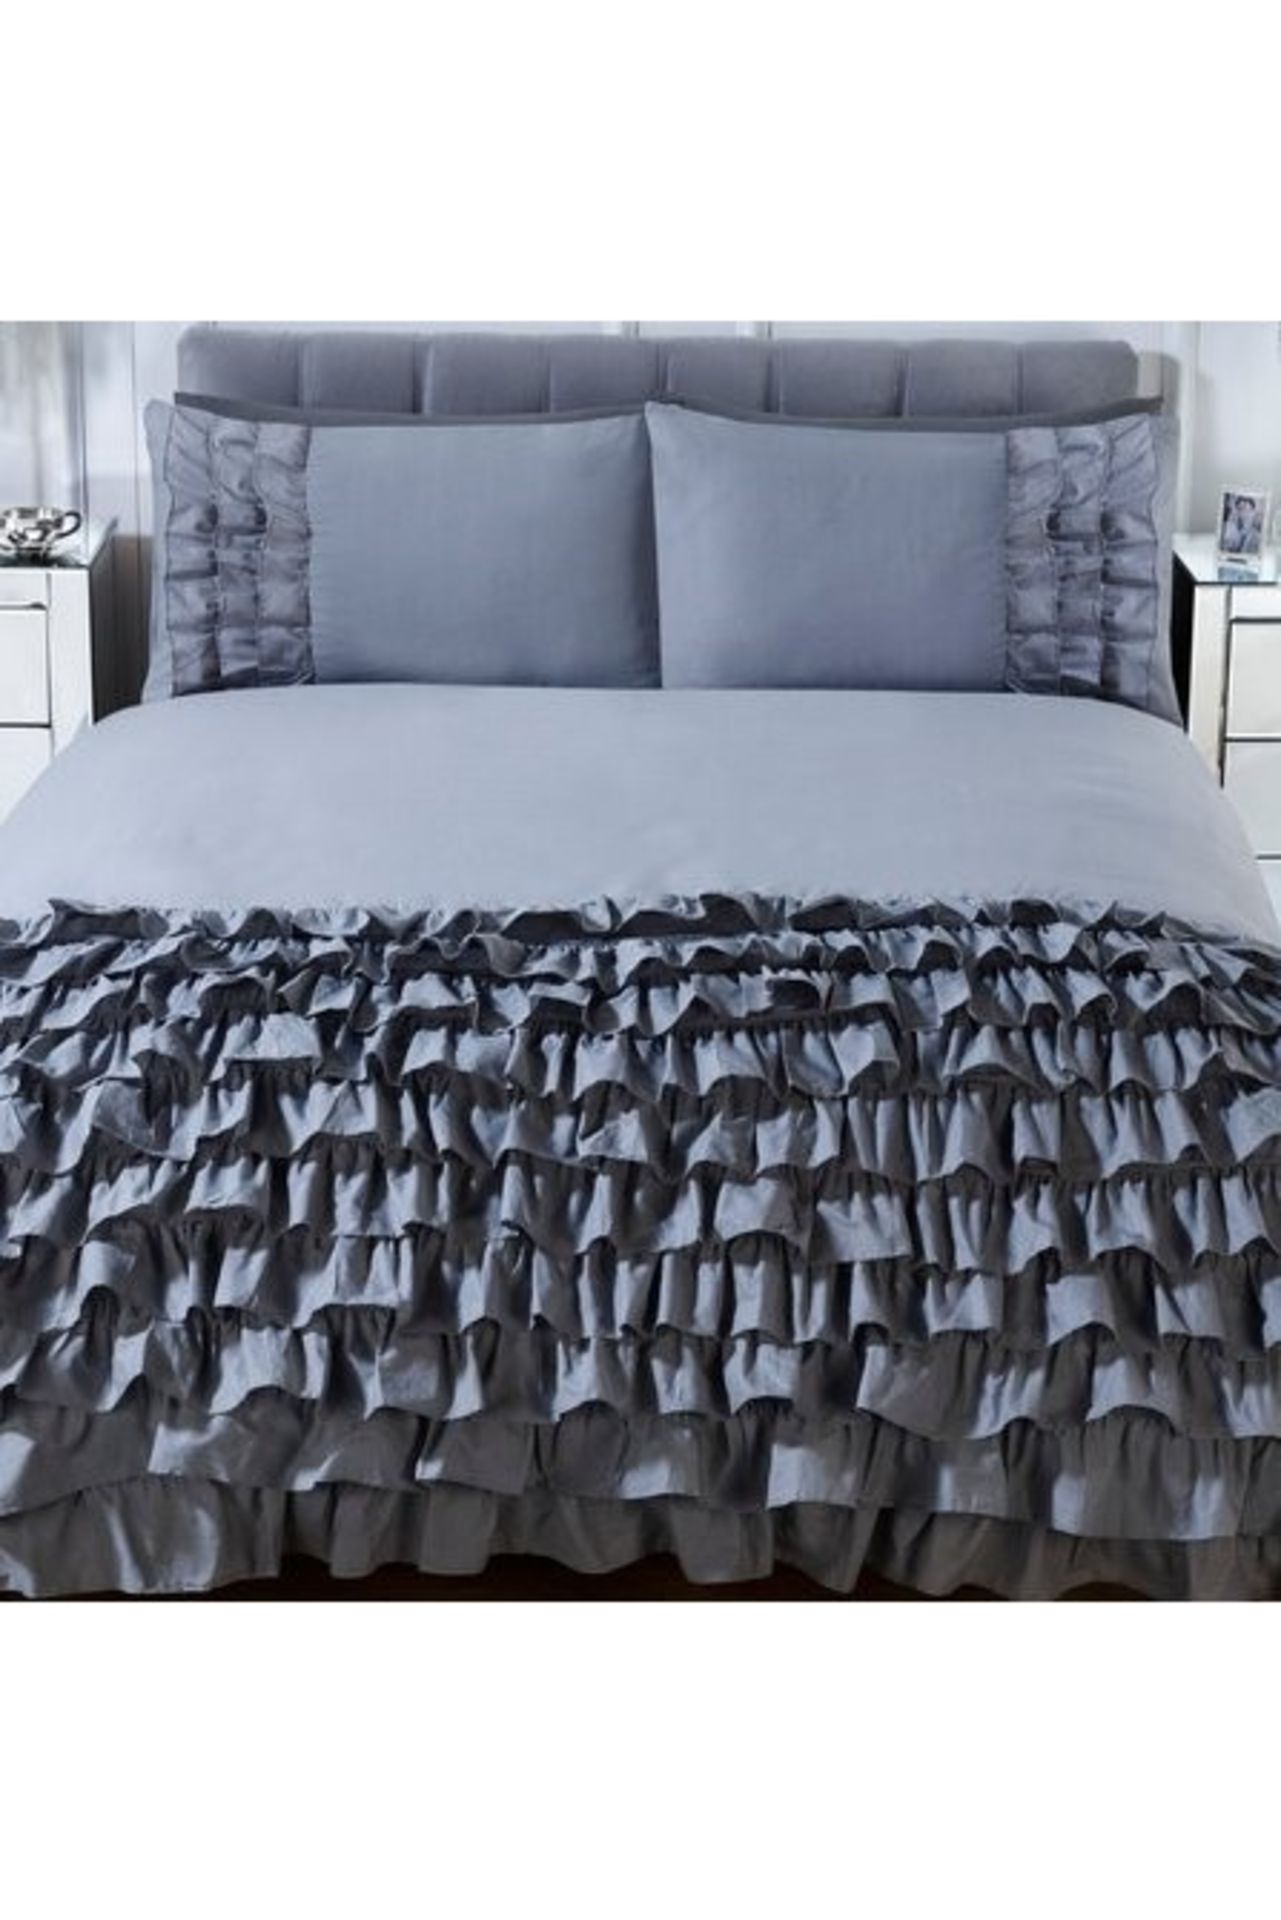 1 BAGGED BALMORAL BELLE AMIE DOUBLE DUVET SET IN CHARCOAL (PUBLIC VIEWING AVAILABLE)